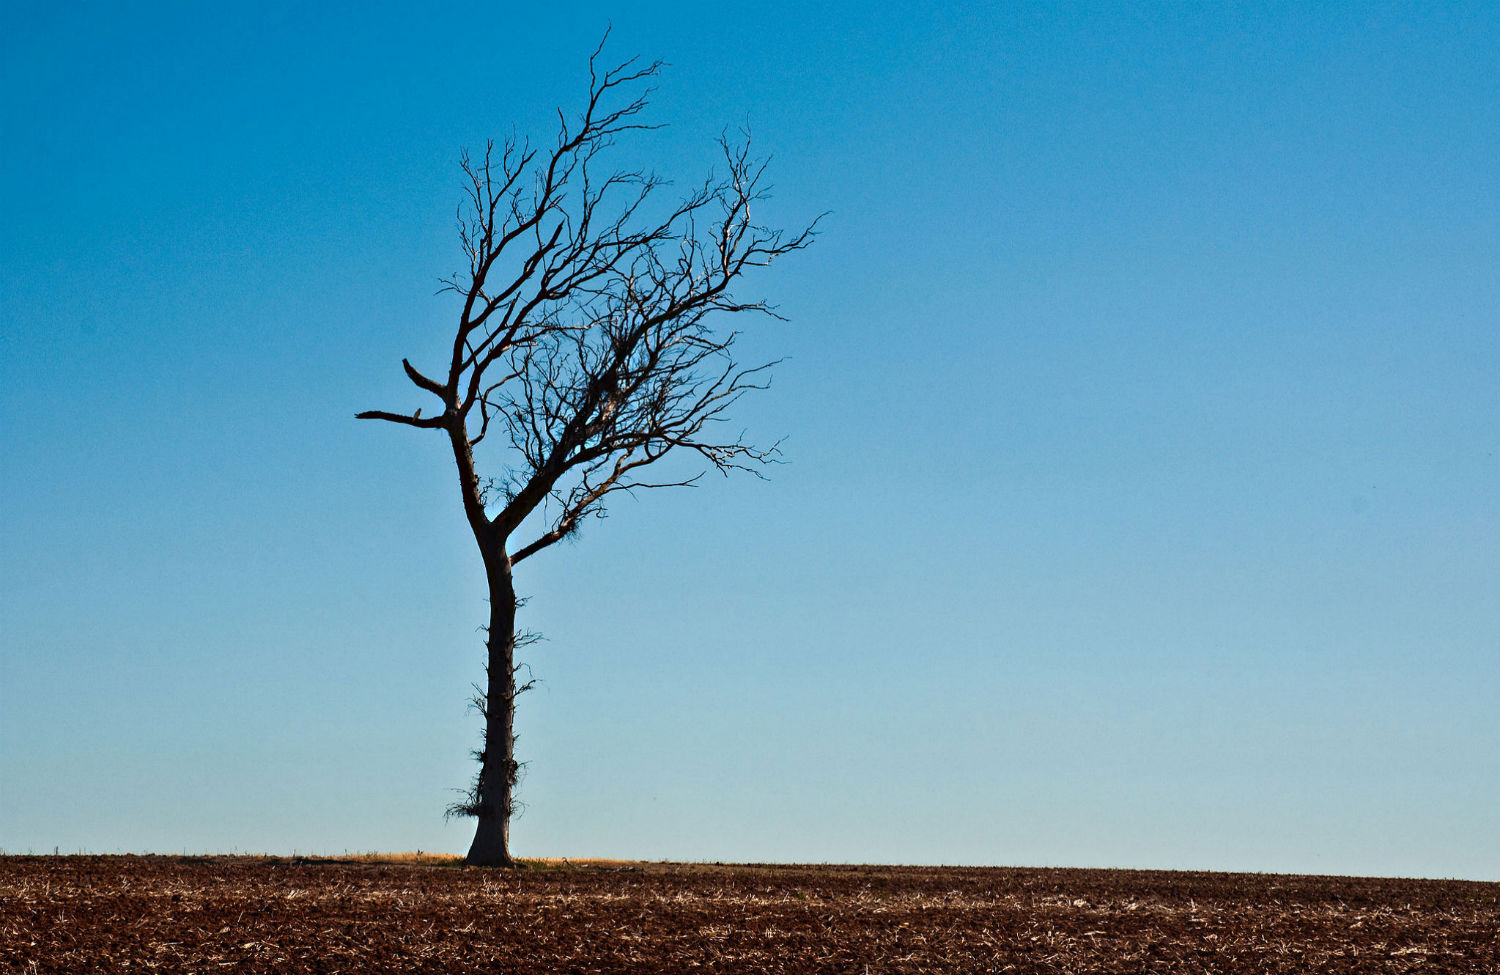 Three Poems to Get You Through the Drought